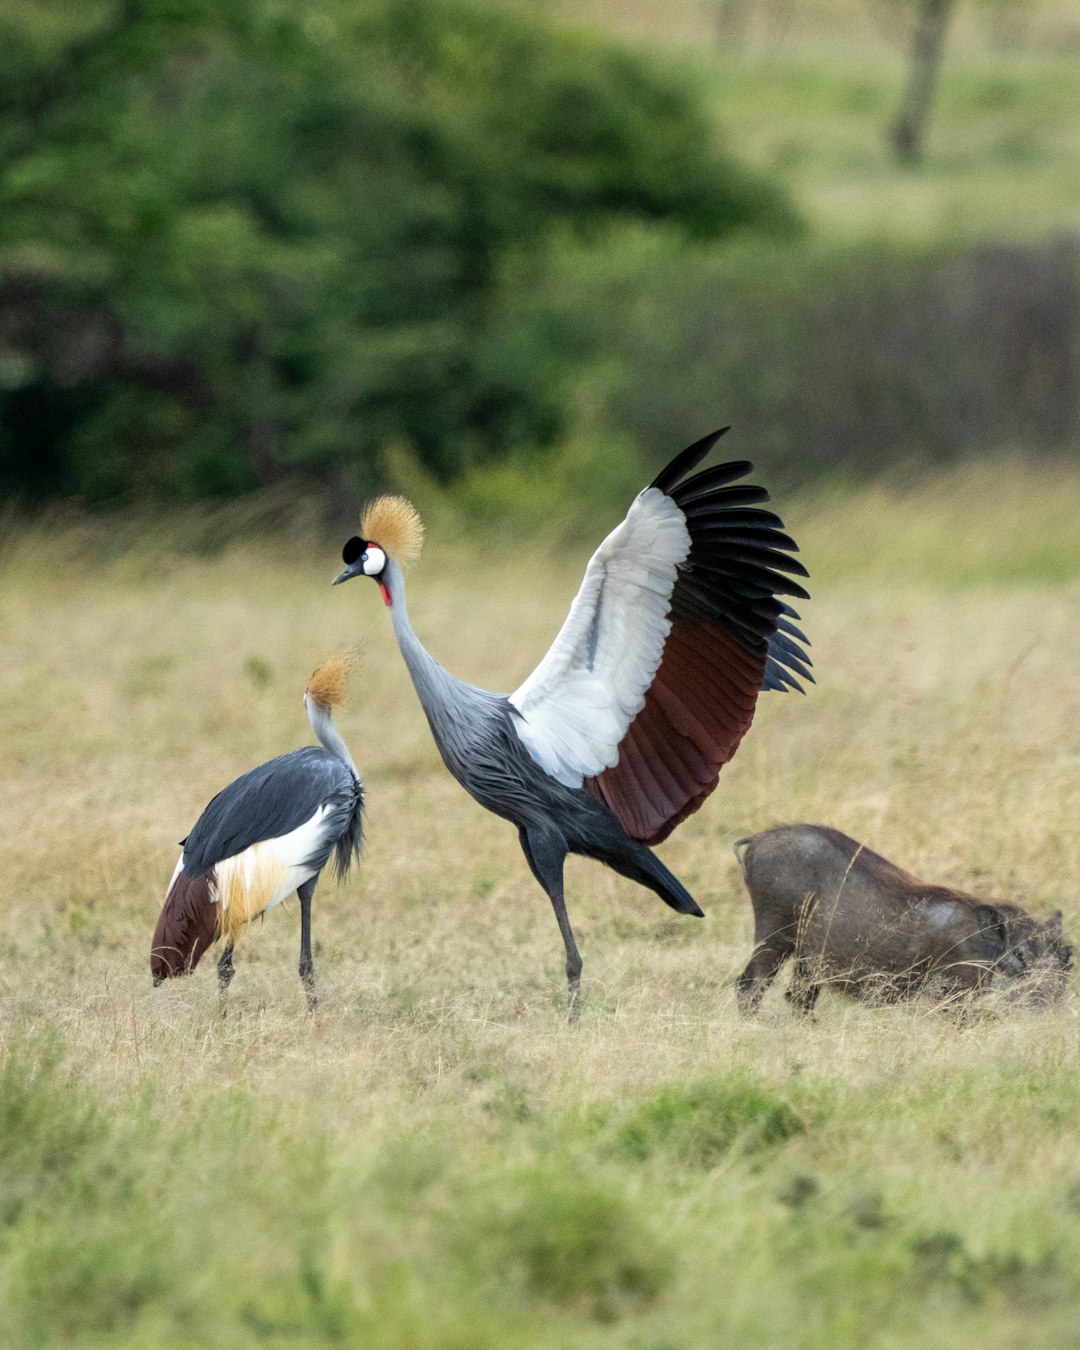 grey crowned crane on green grass field during daytime